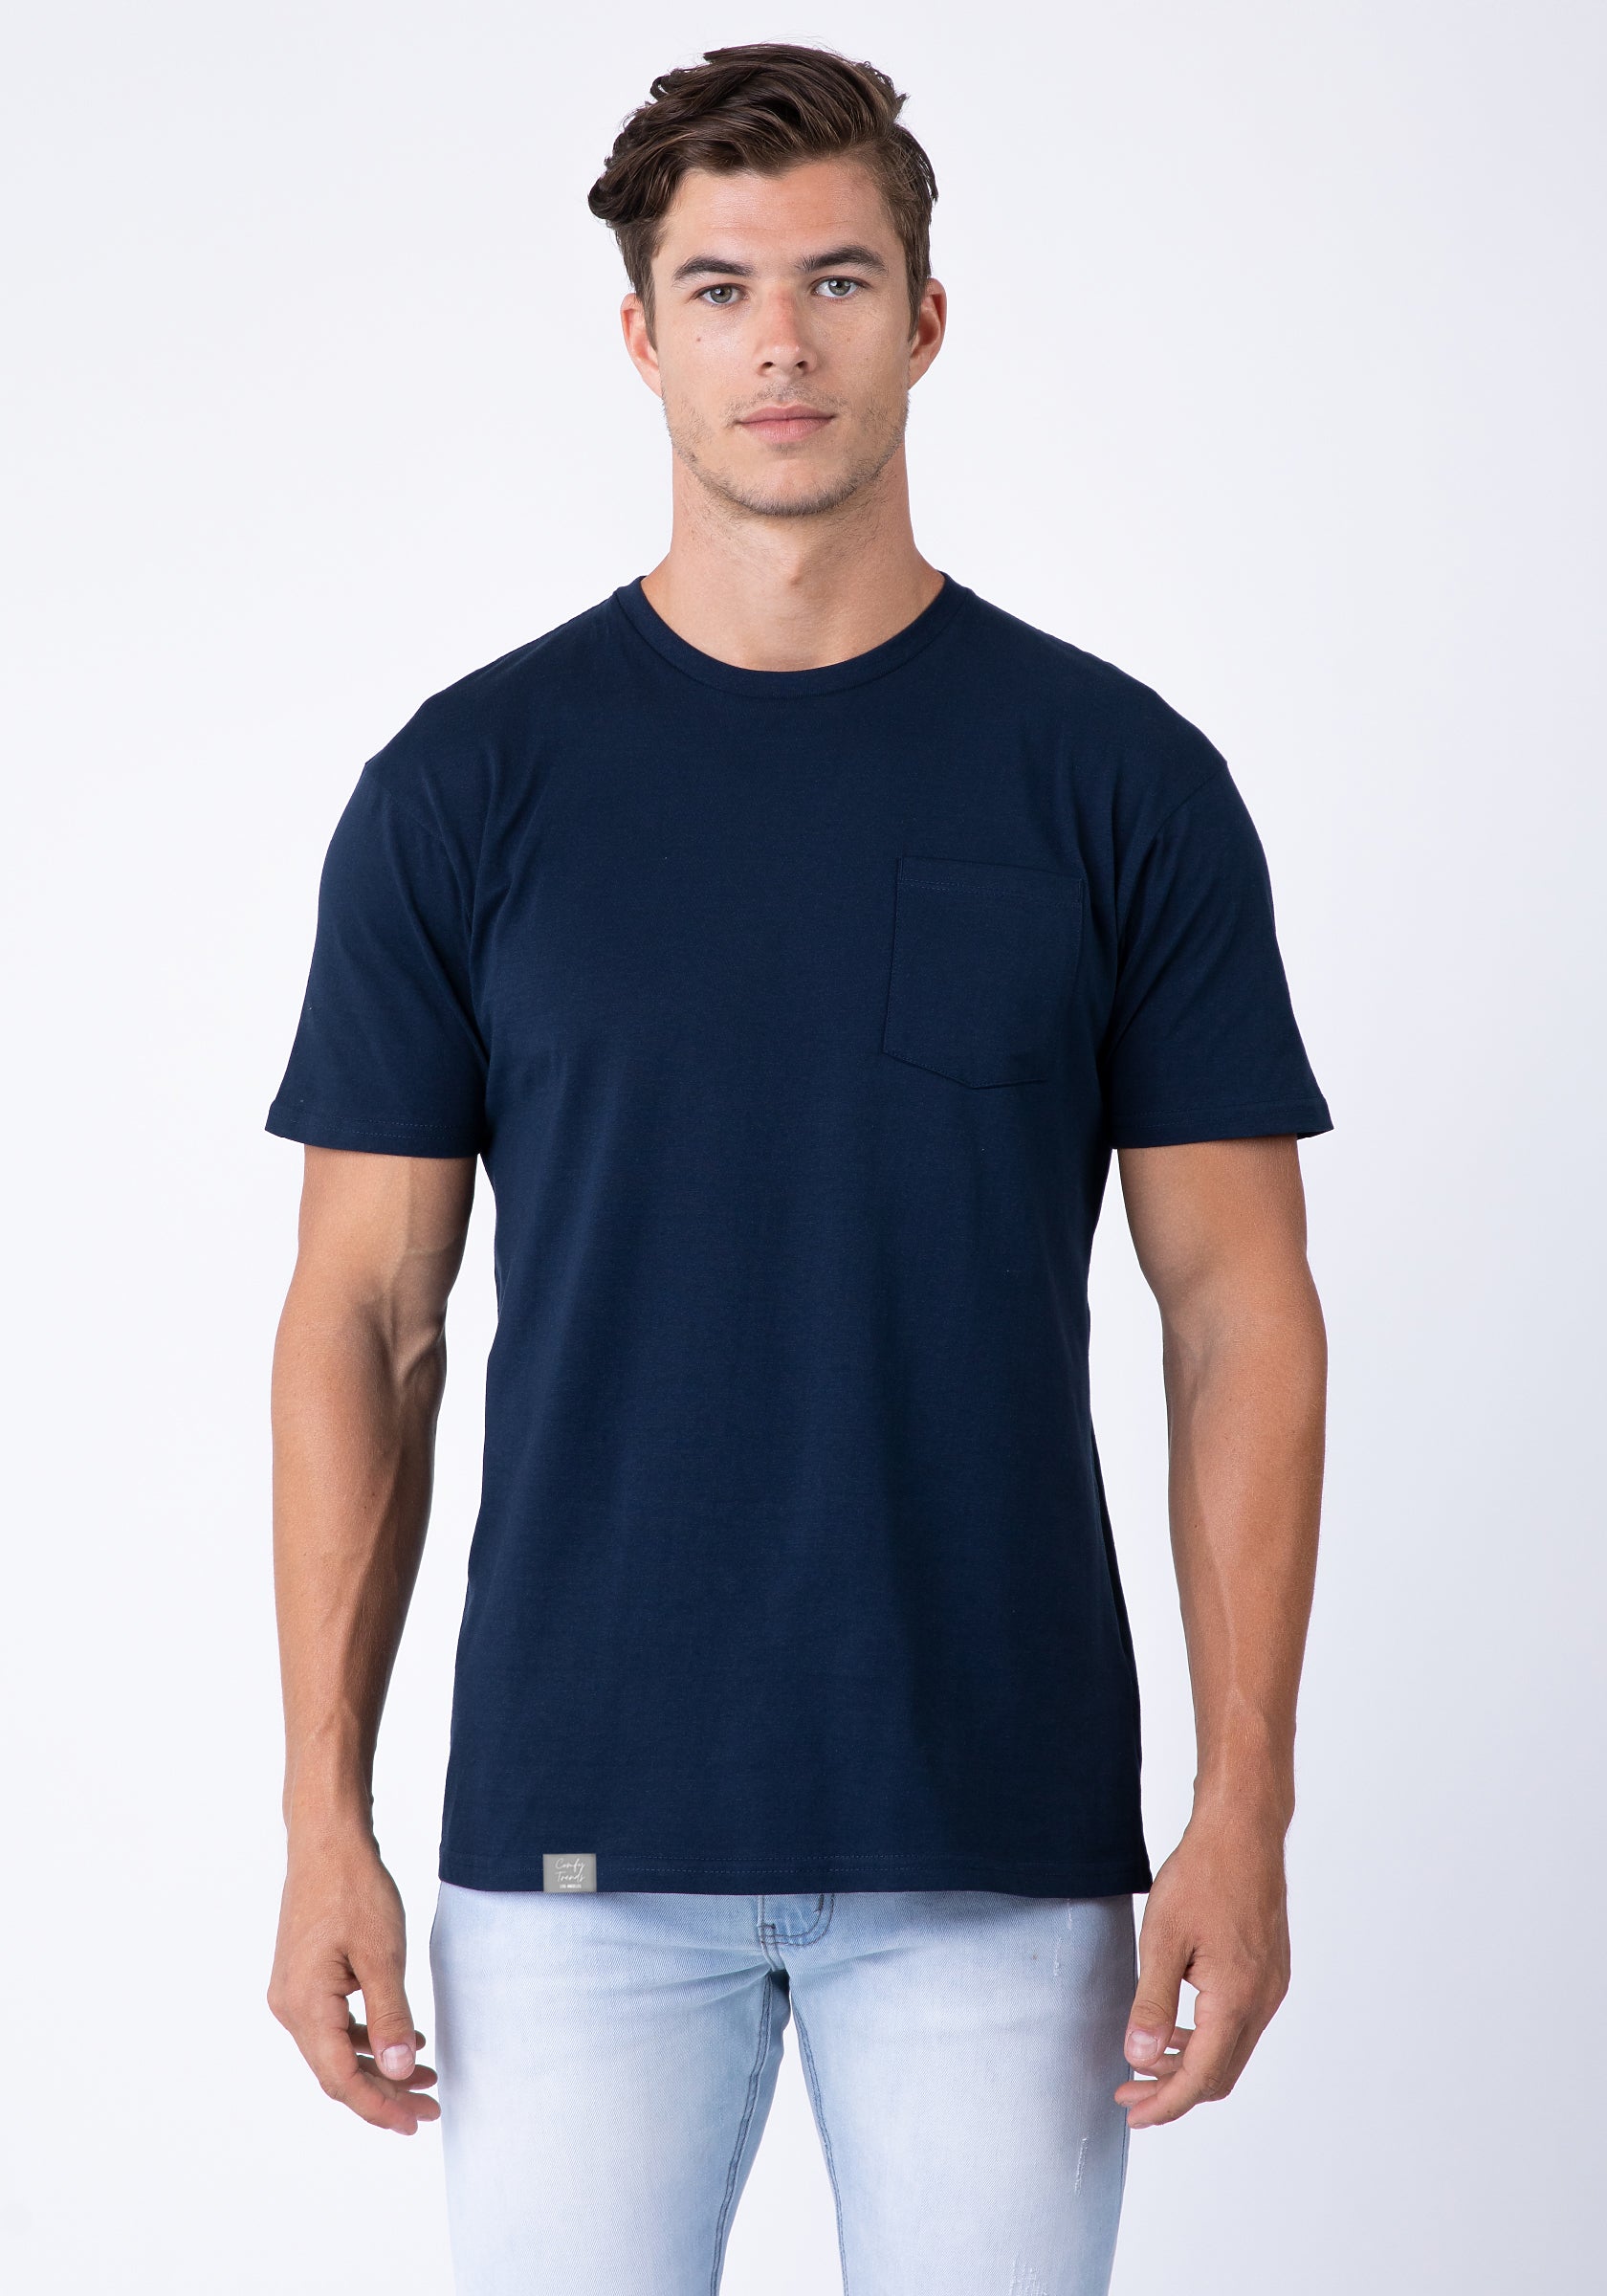 Soft-Washed Ultra Comfy Tee with Pocket